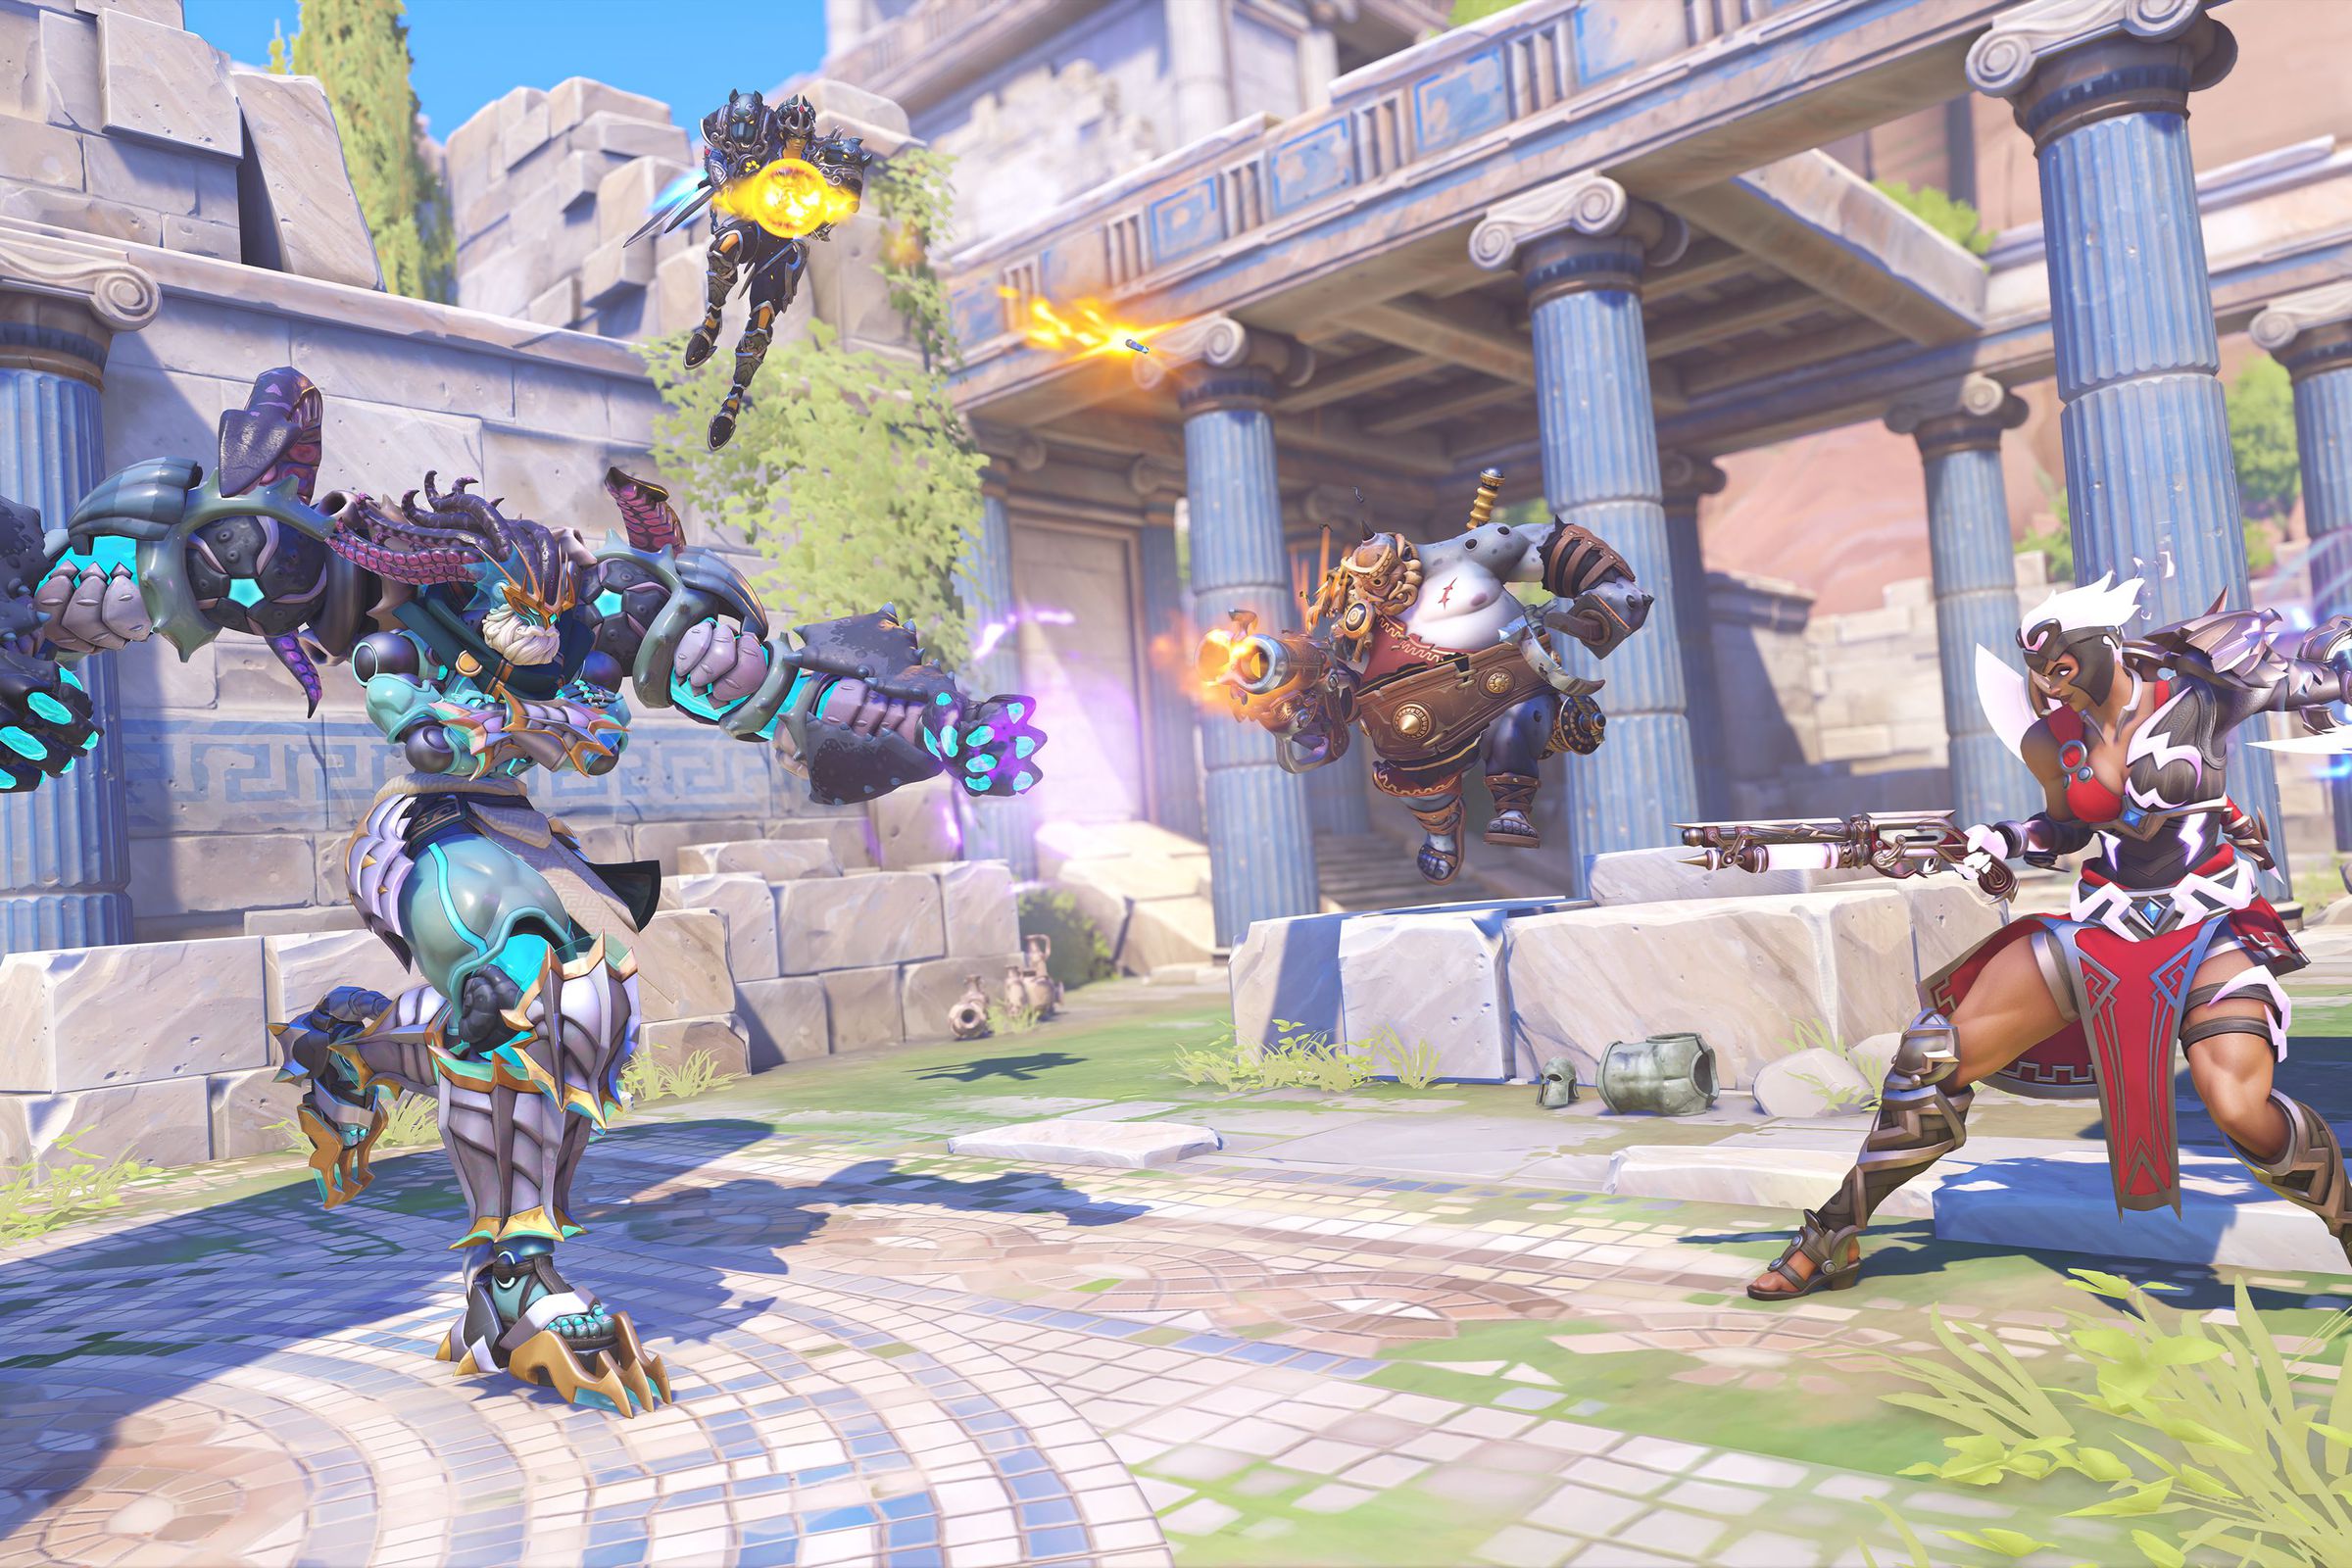 Screenshot from Overwatch 2’s Battle for Olympus event featuring several heroes engaged in a team fight.